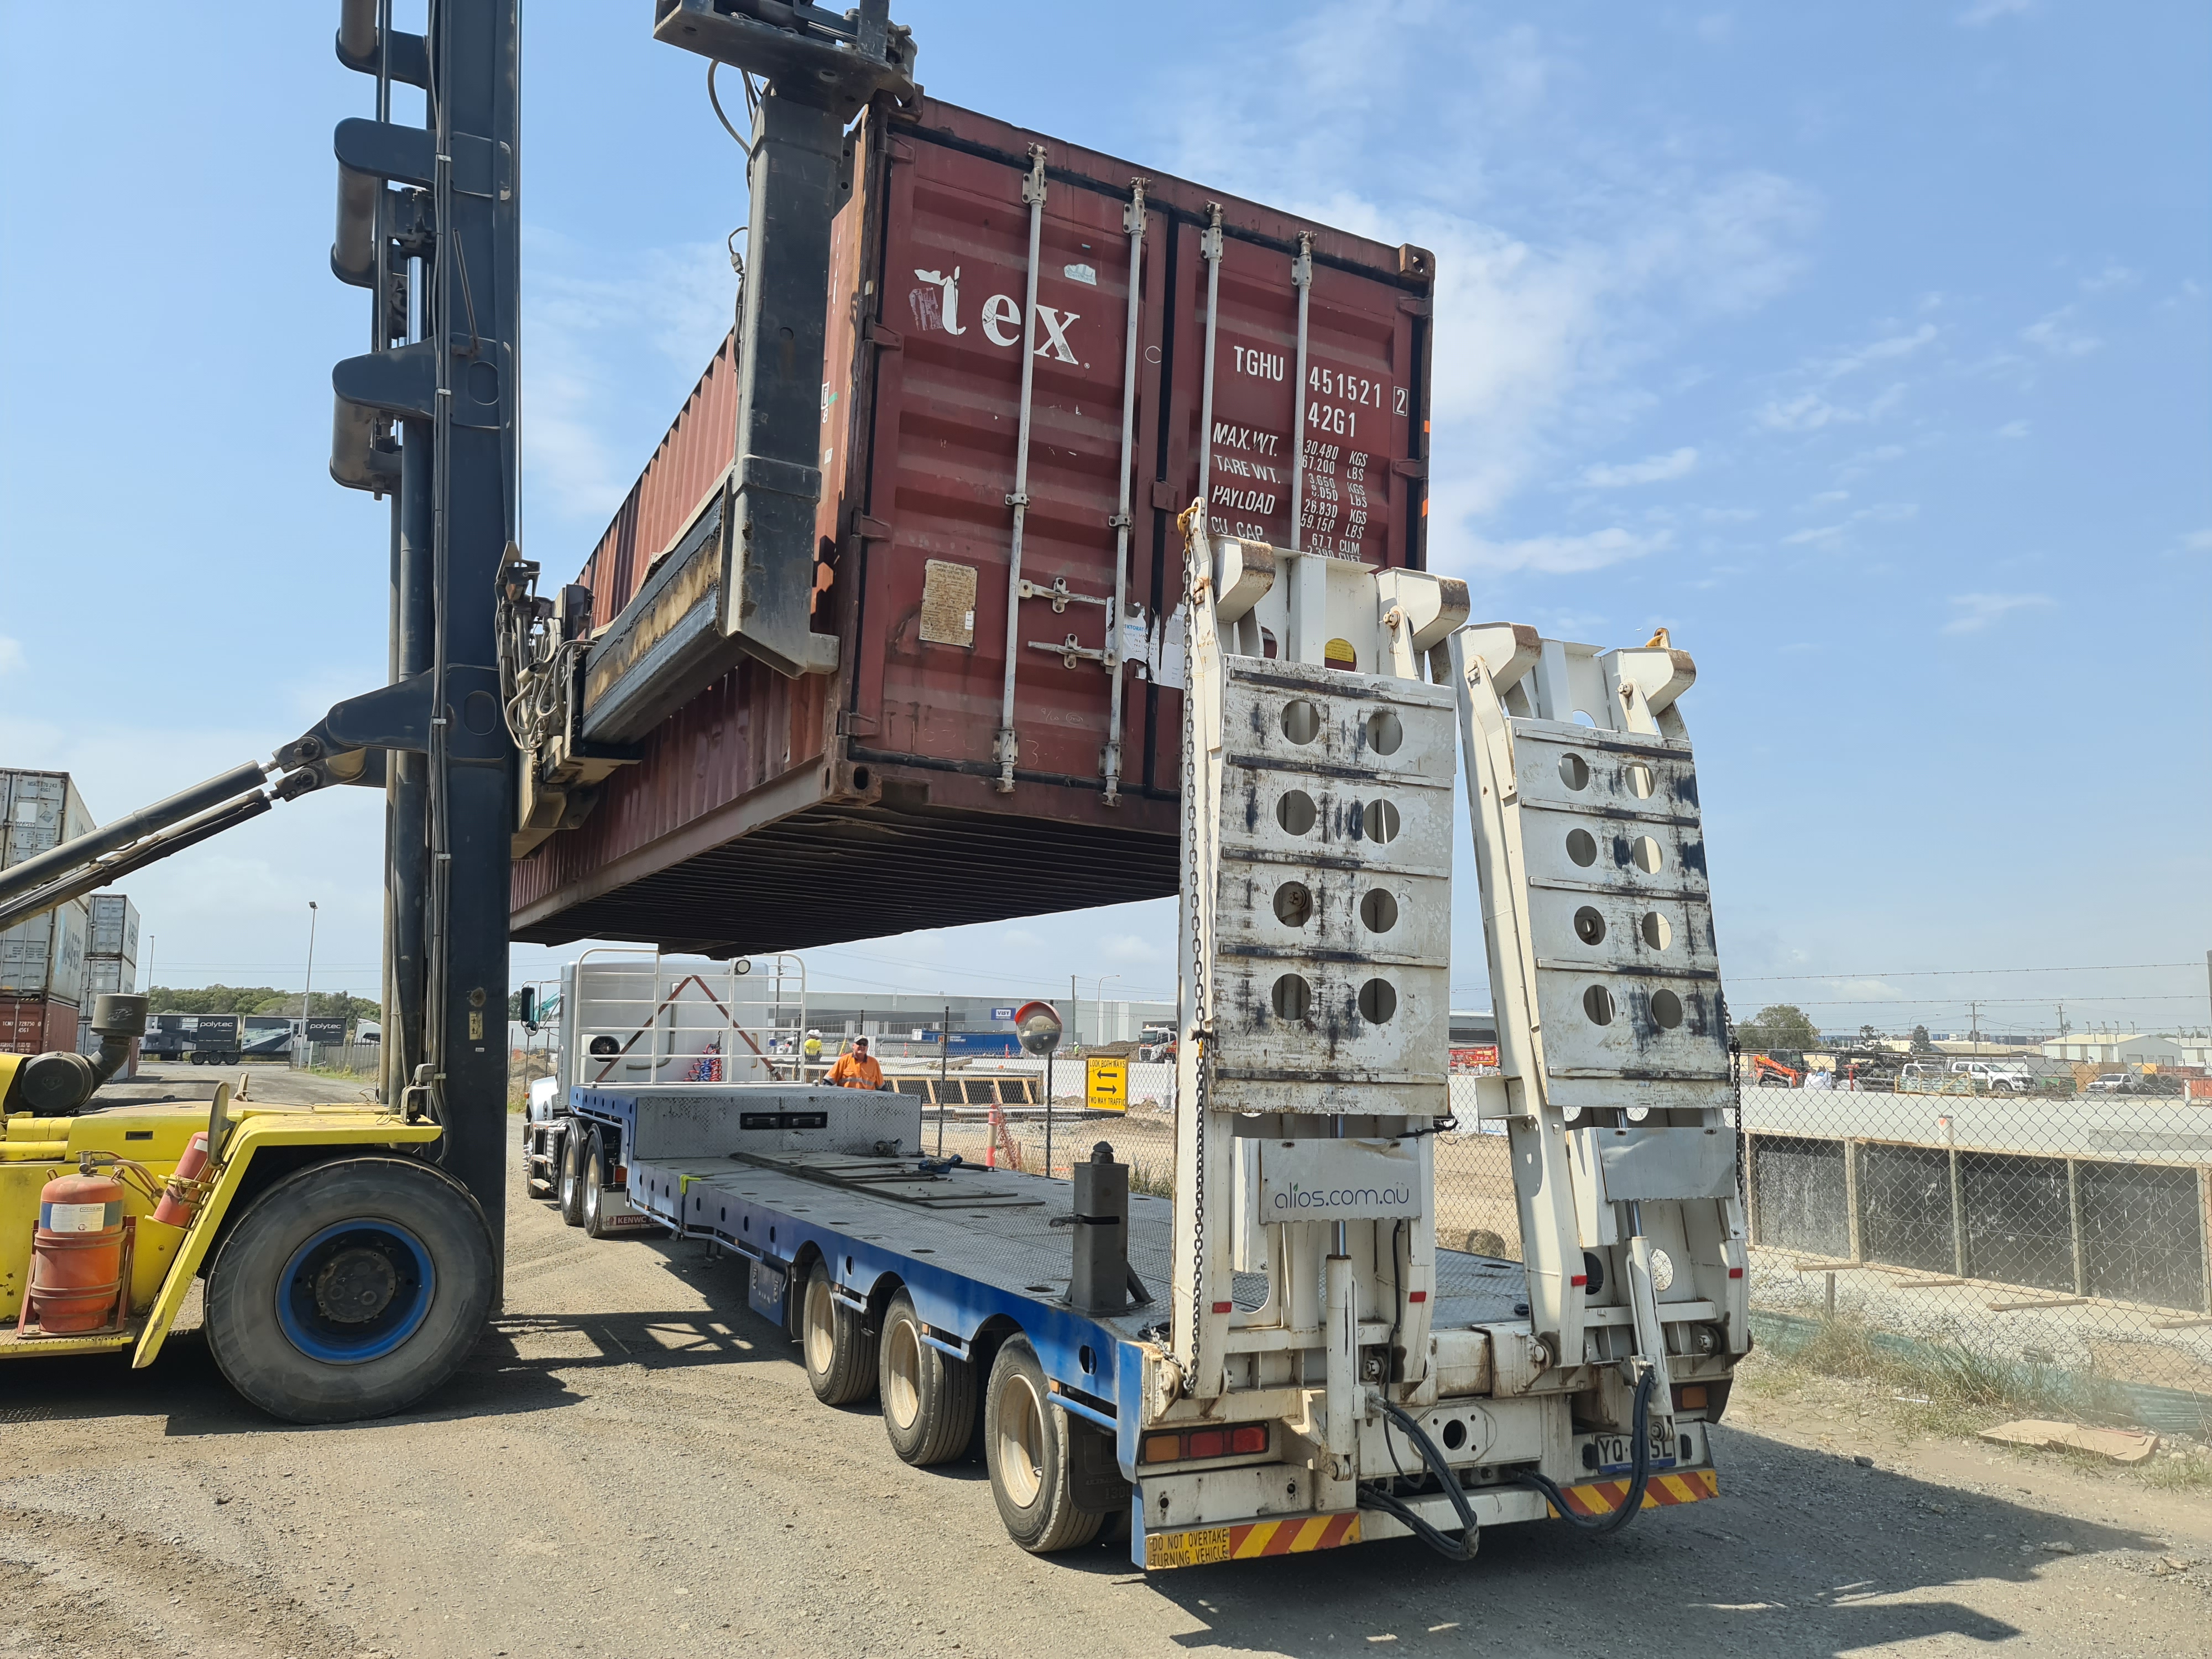 A 40ft shipping container being loaded onto a truck